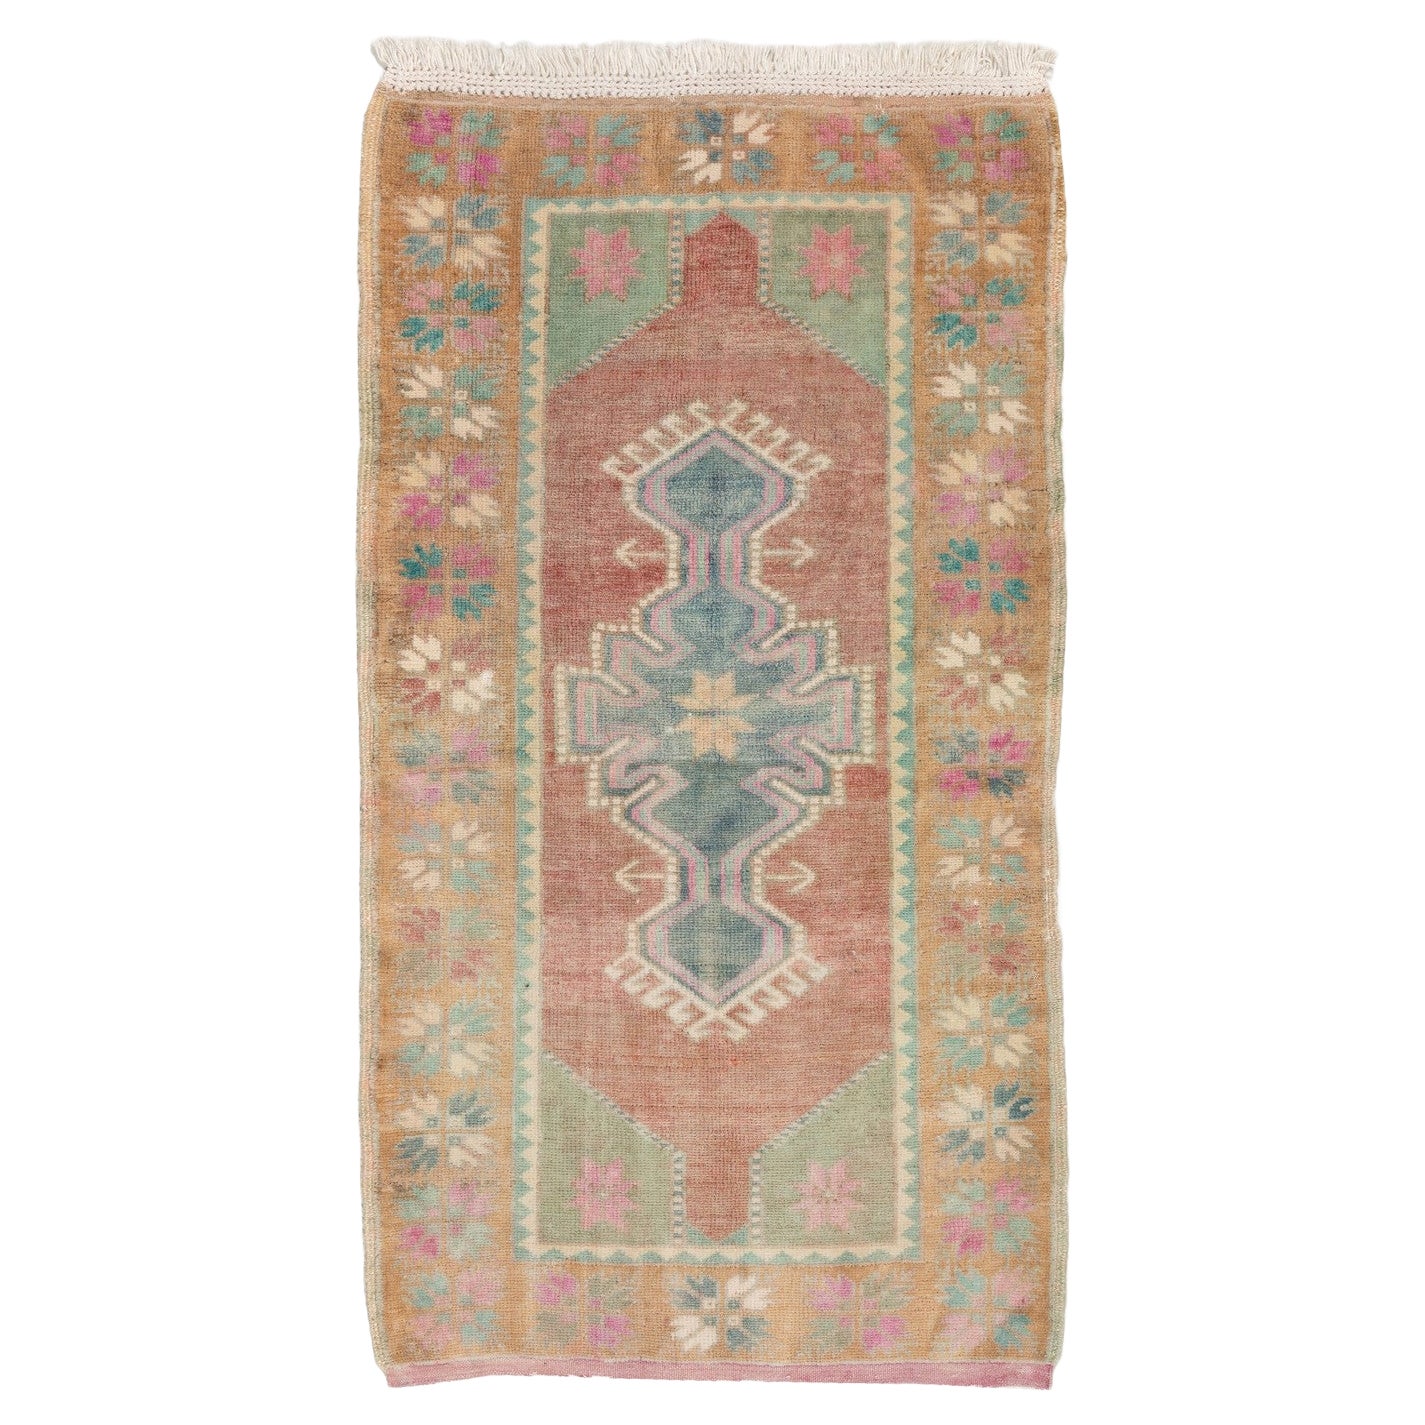 2.8x4.7 Ft Handmade Vintage Turkish Accent Rug in Soft Color with Soft Wool Pile